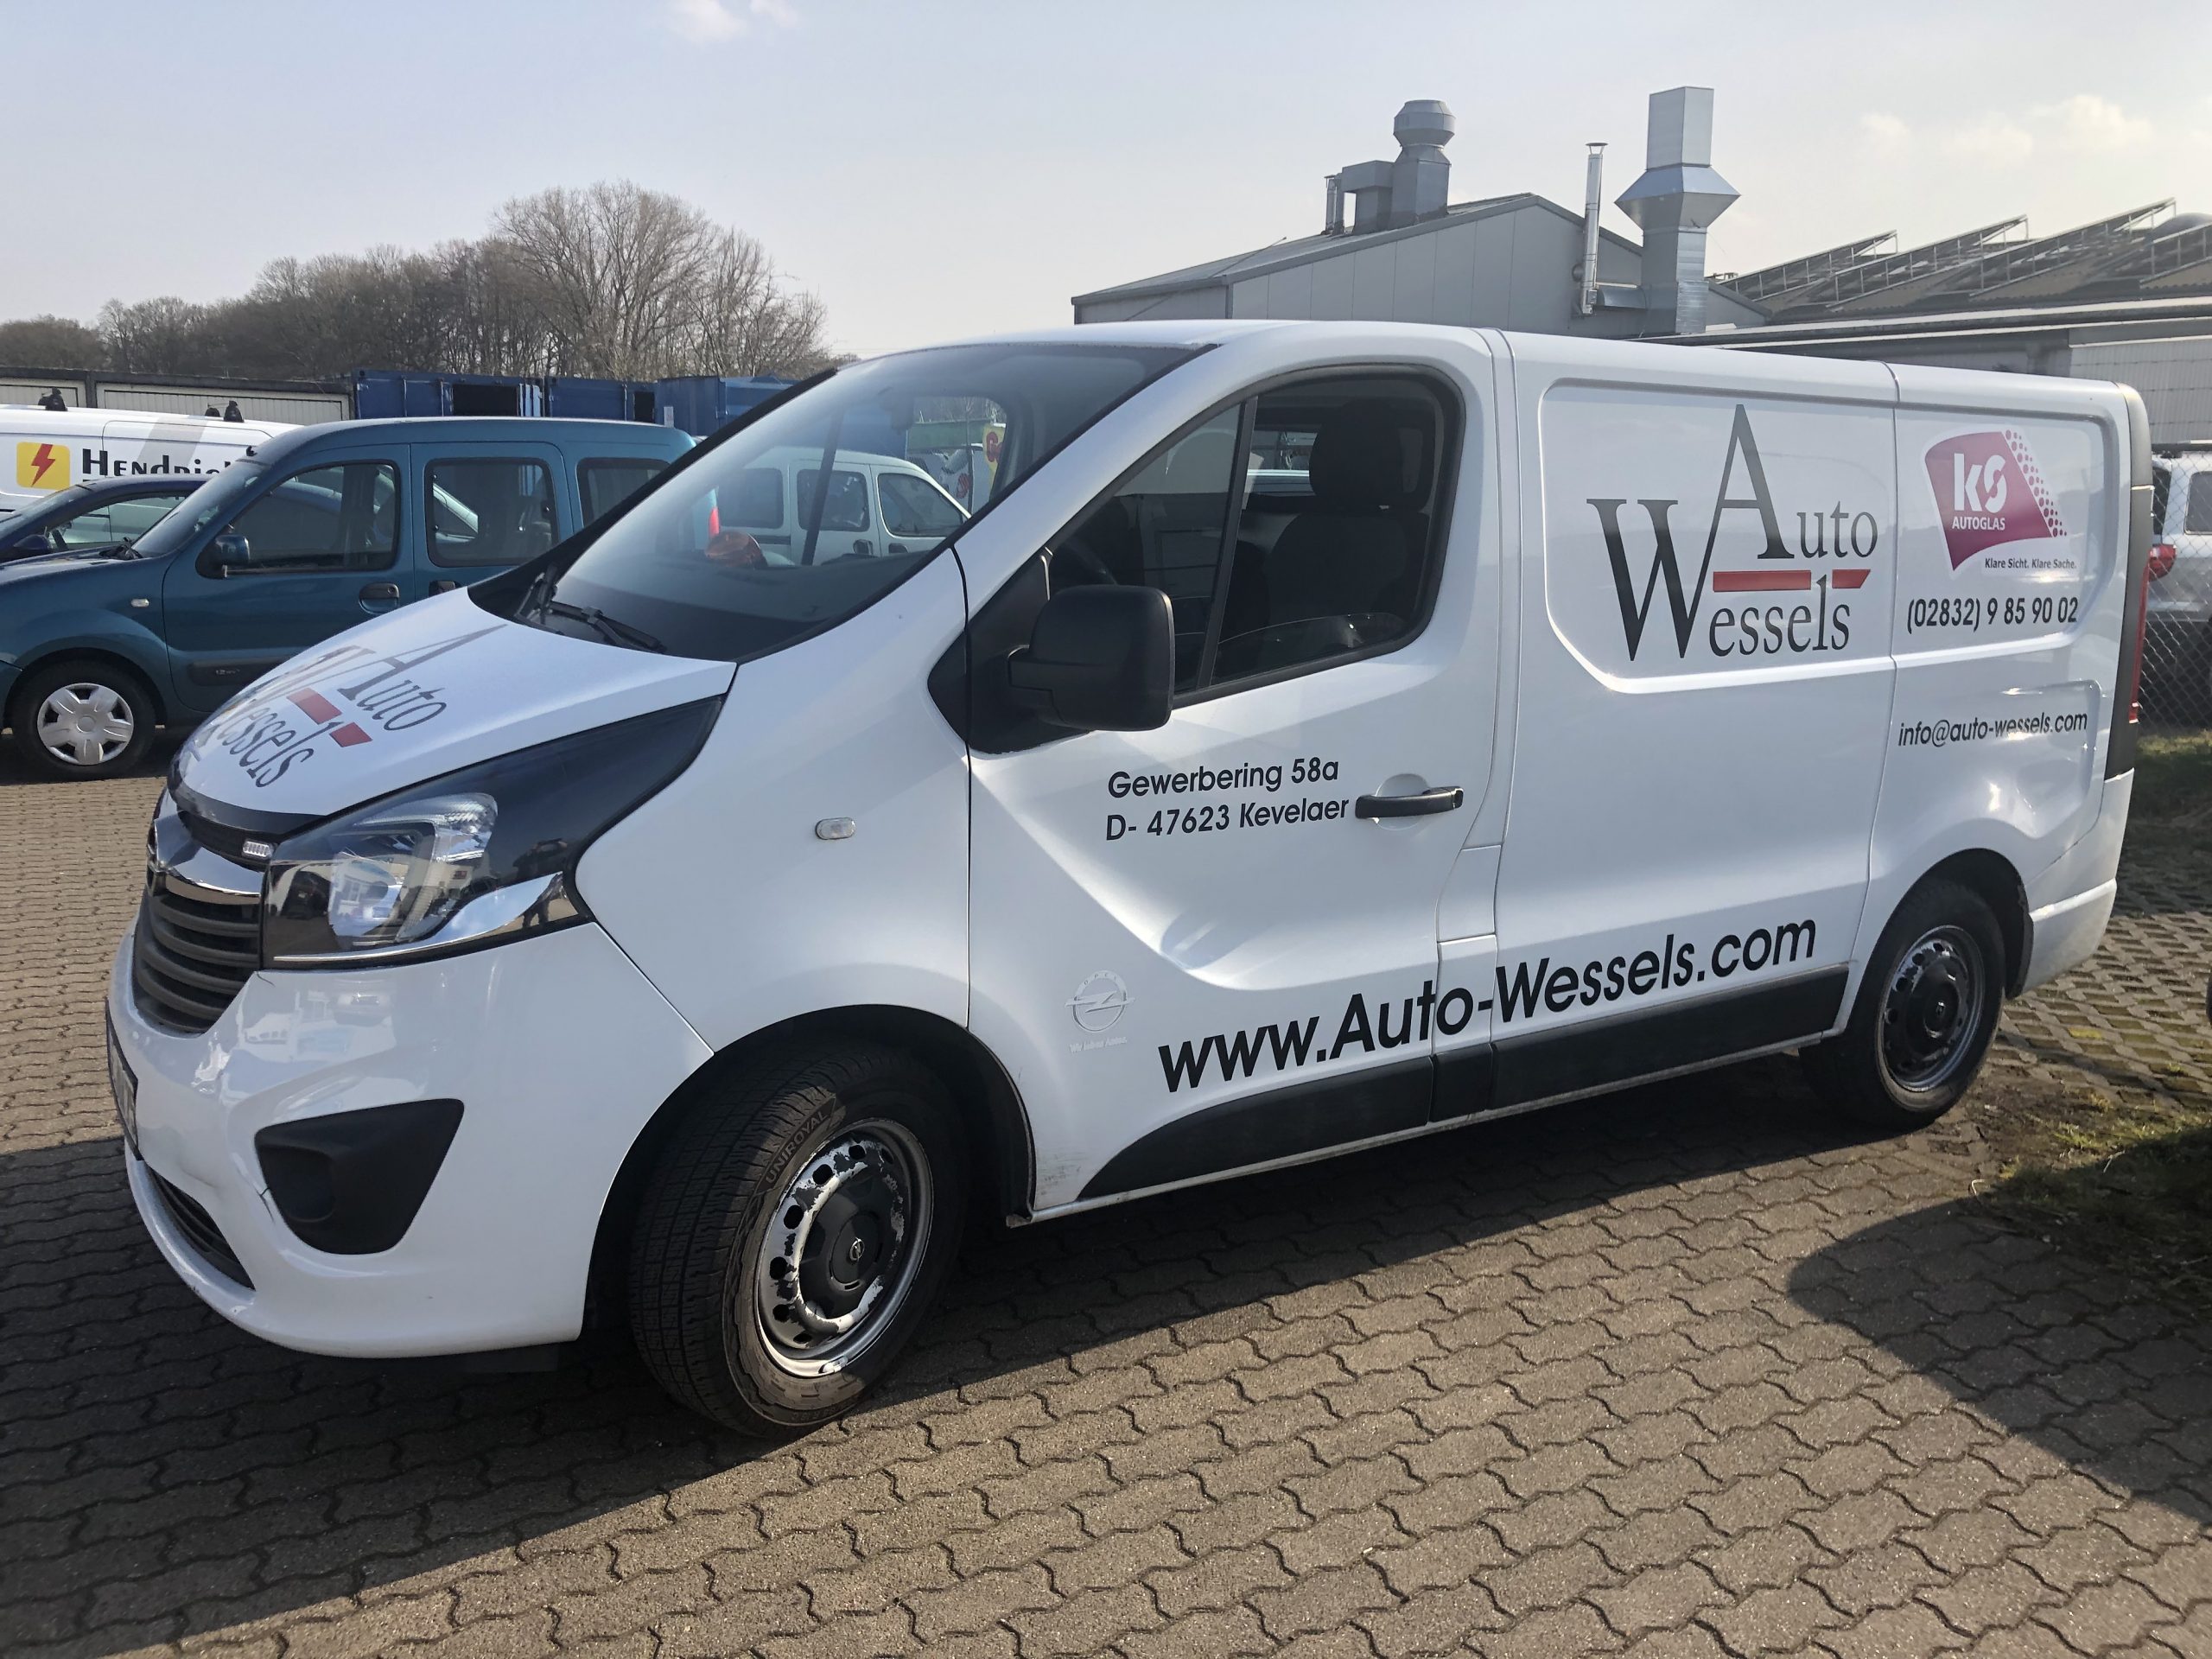 Auto Wessels 2